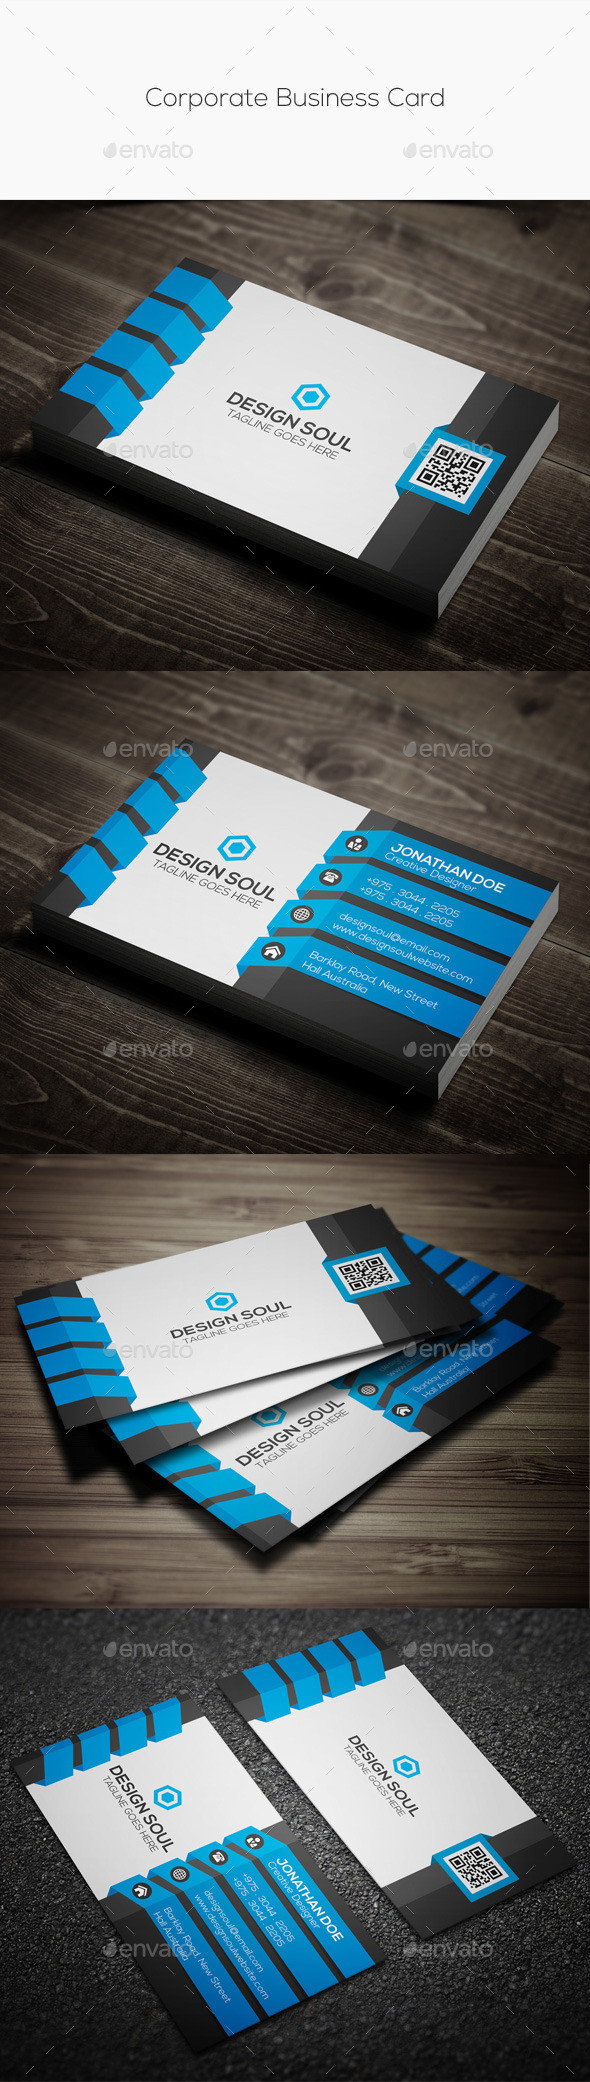 Corporate business card preview